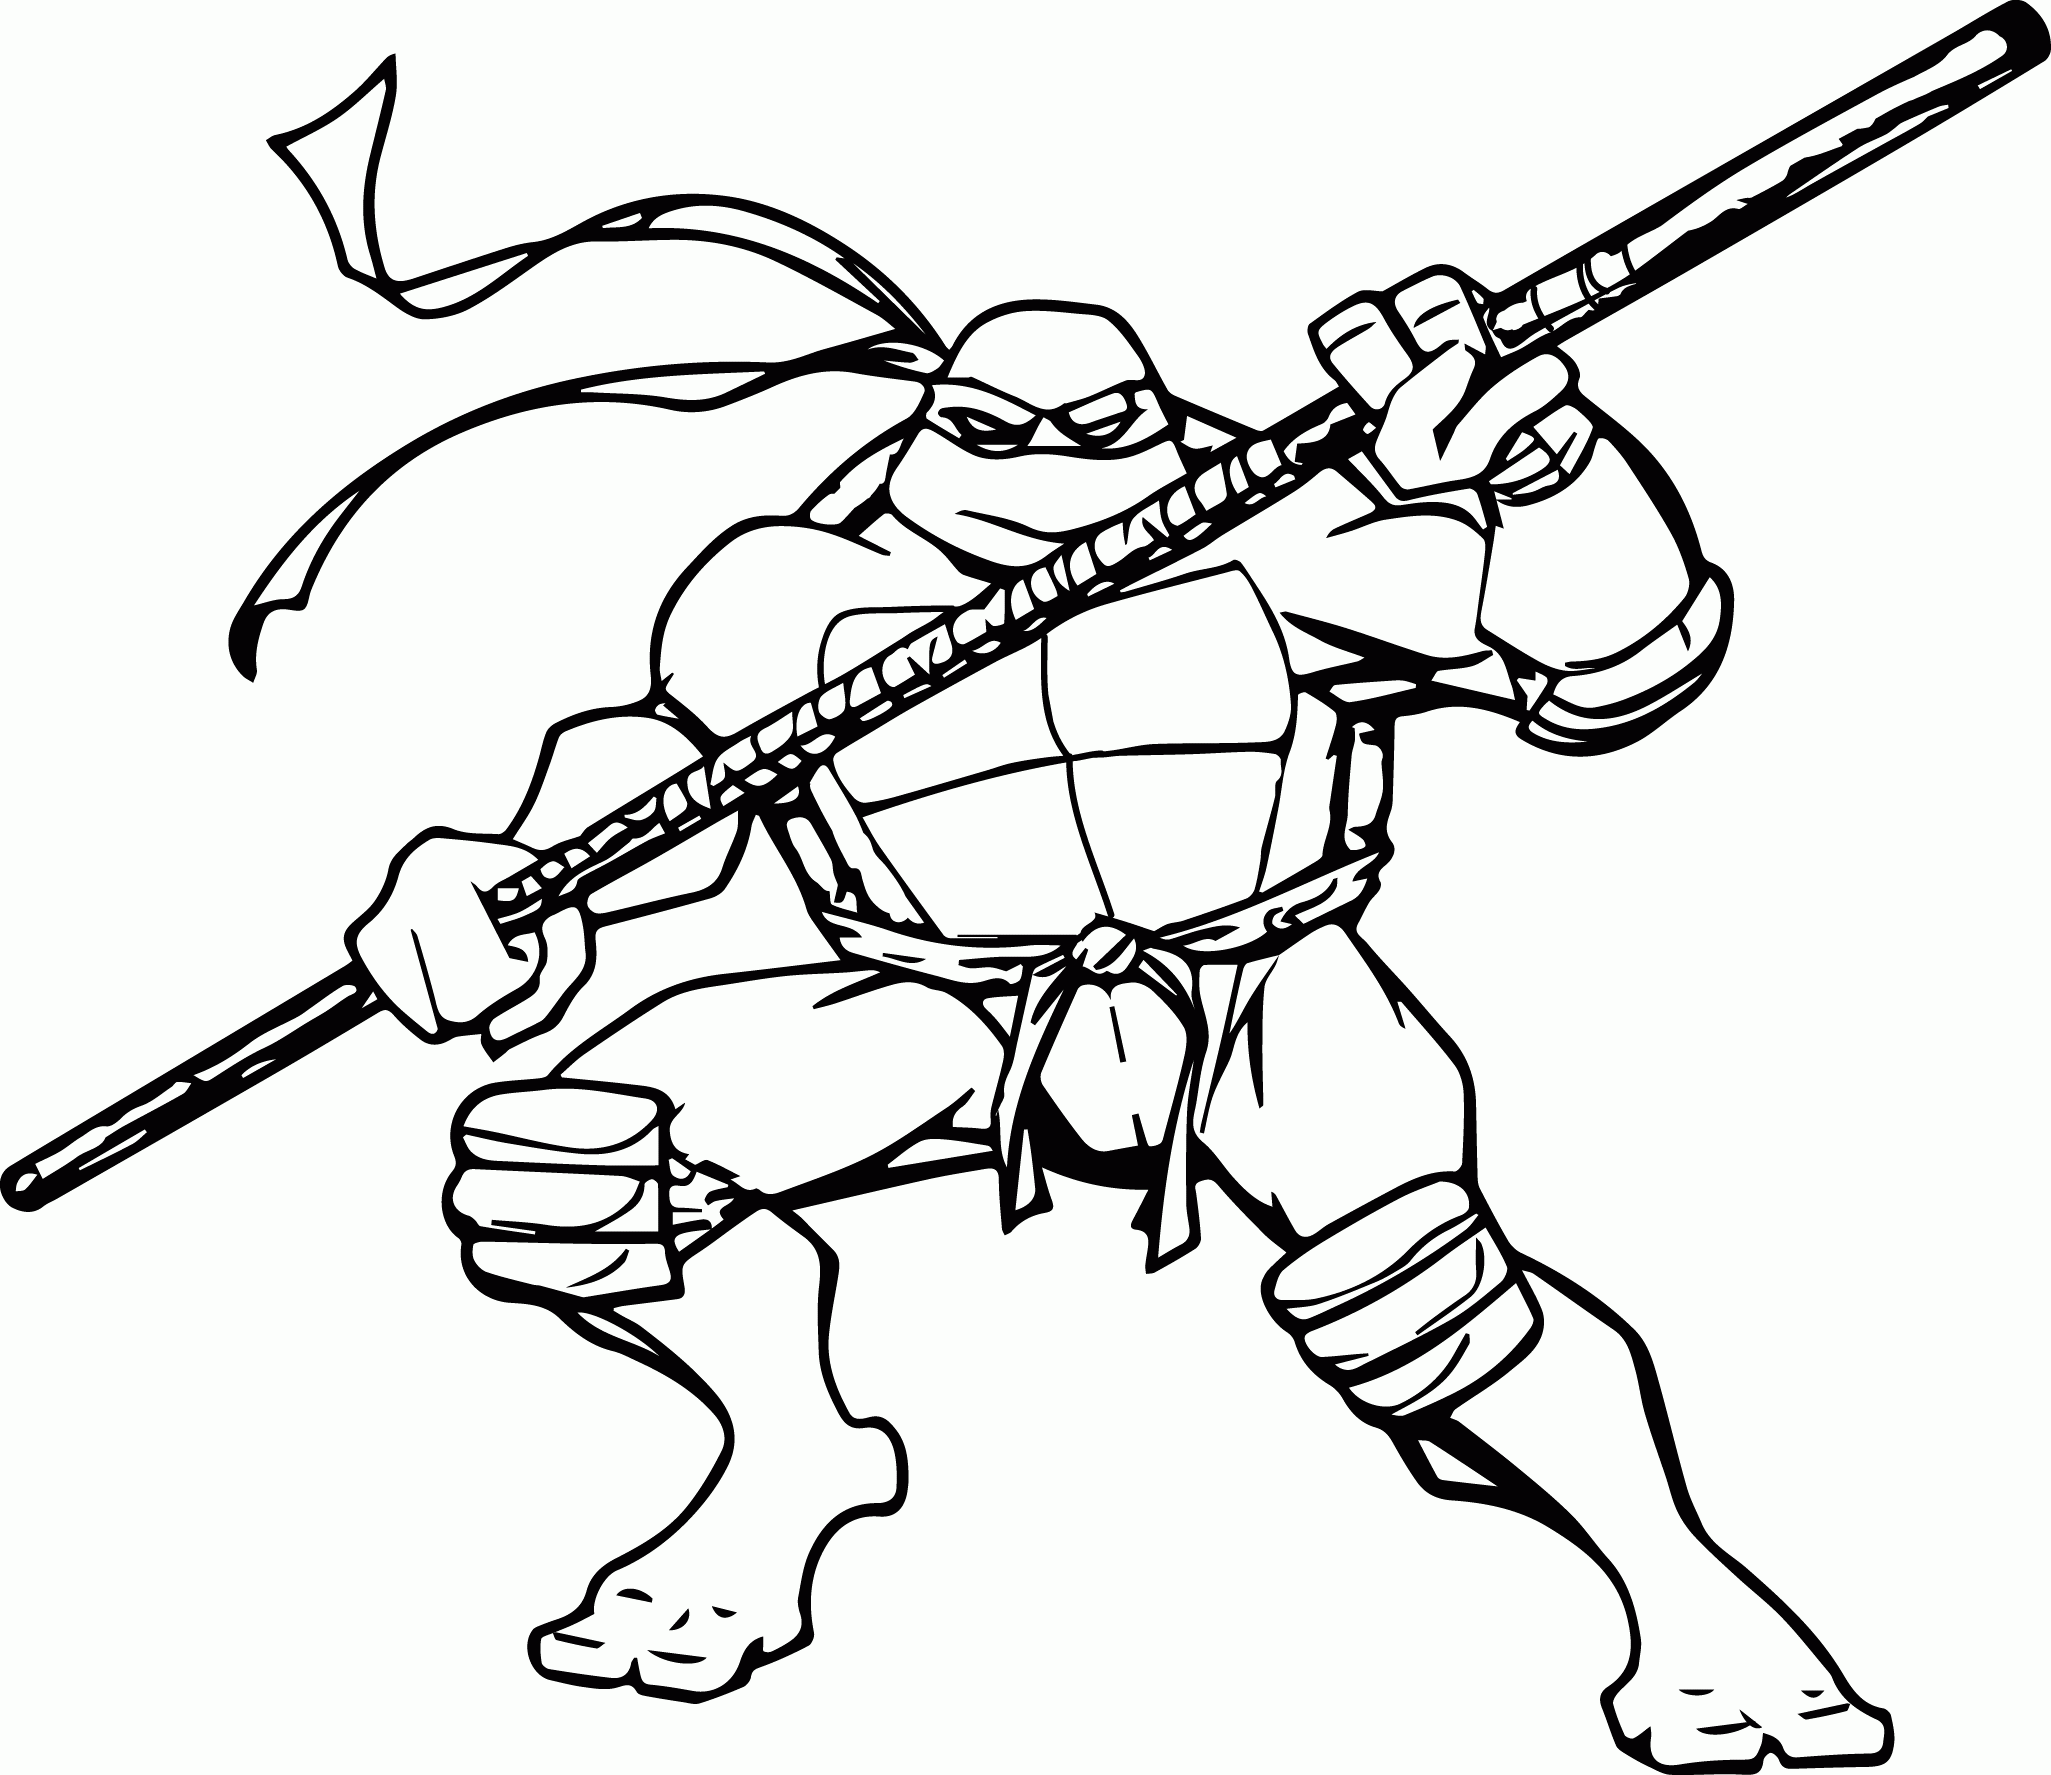 get-this-free-ninja-turtle-coloring-page-to-print-01276